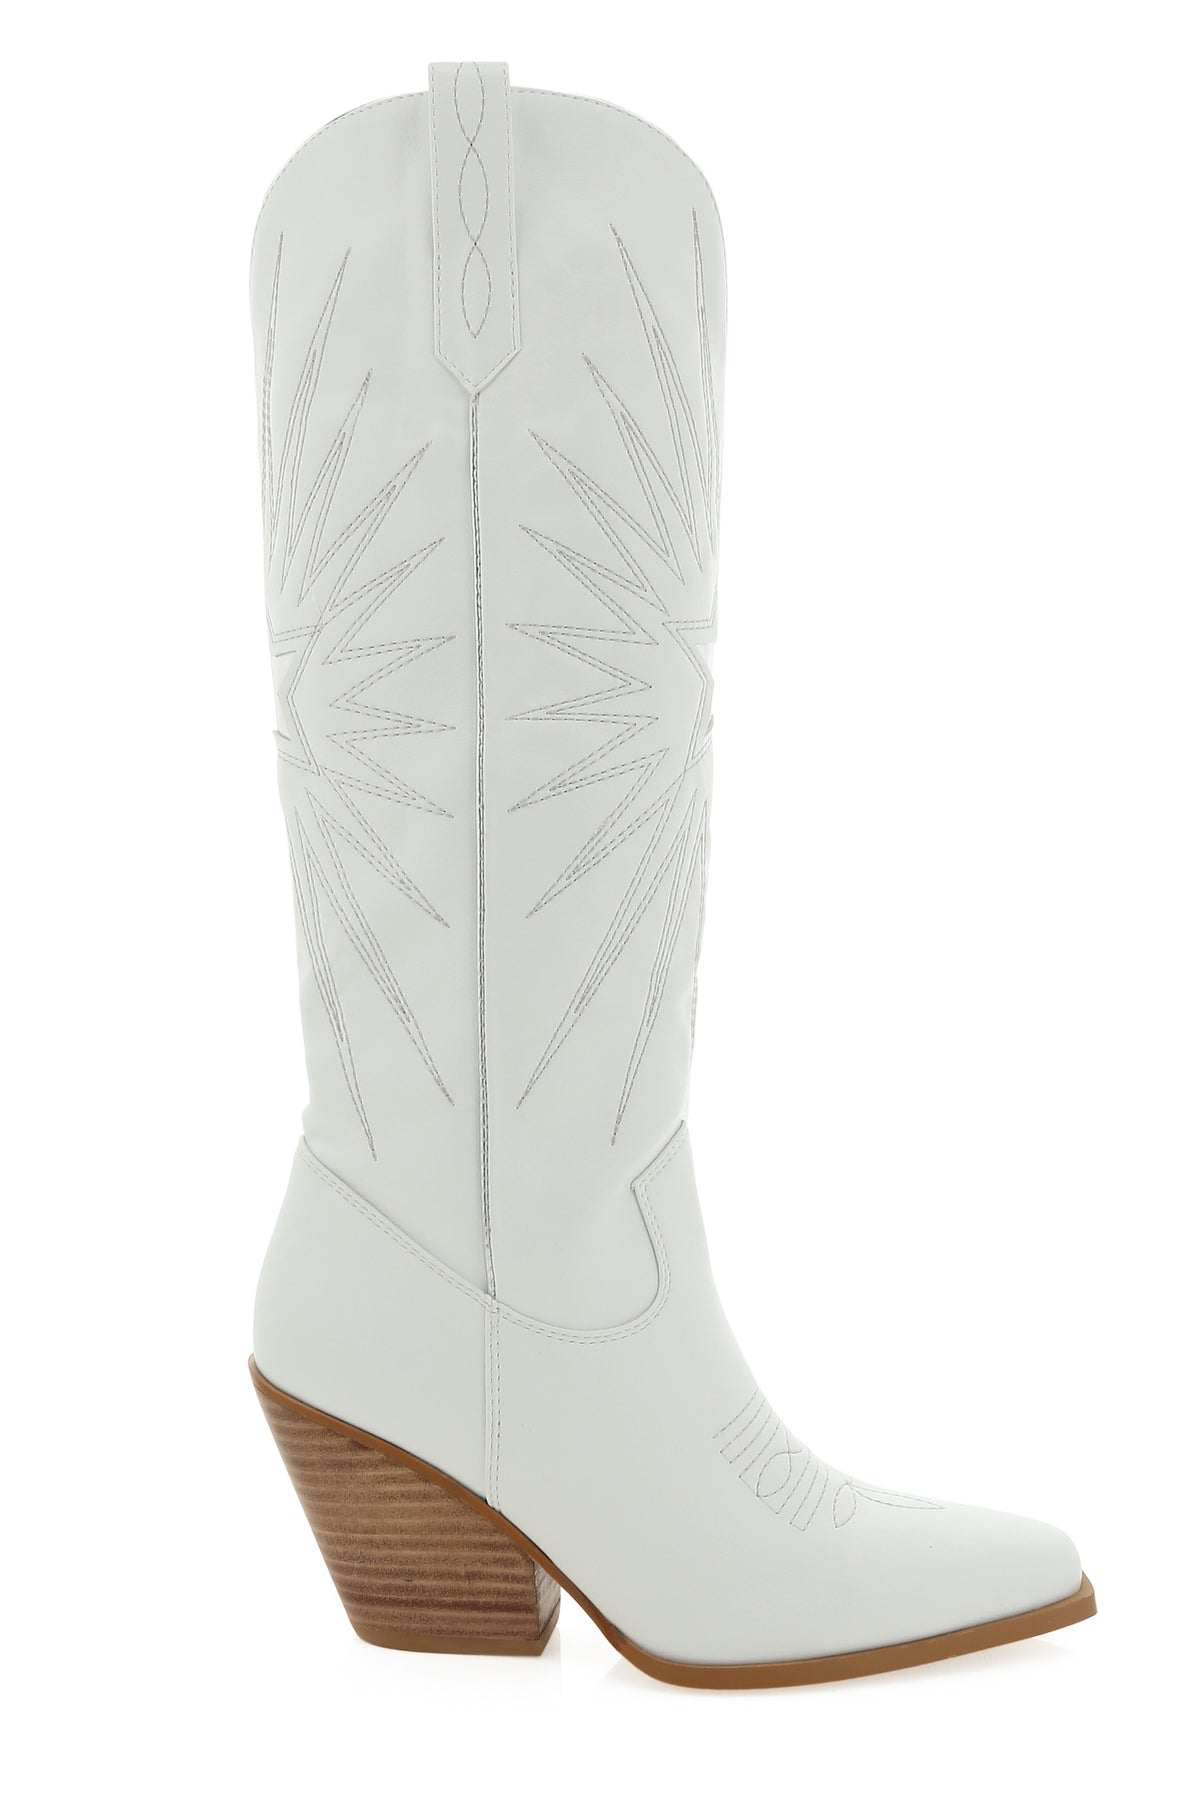 white cowgirl boots for brides